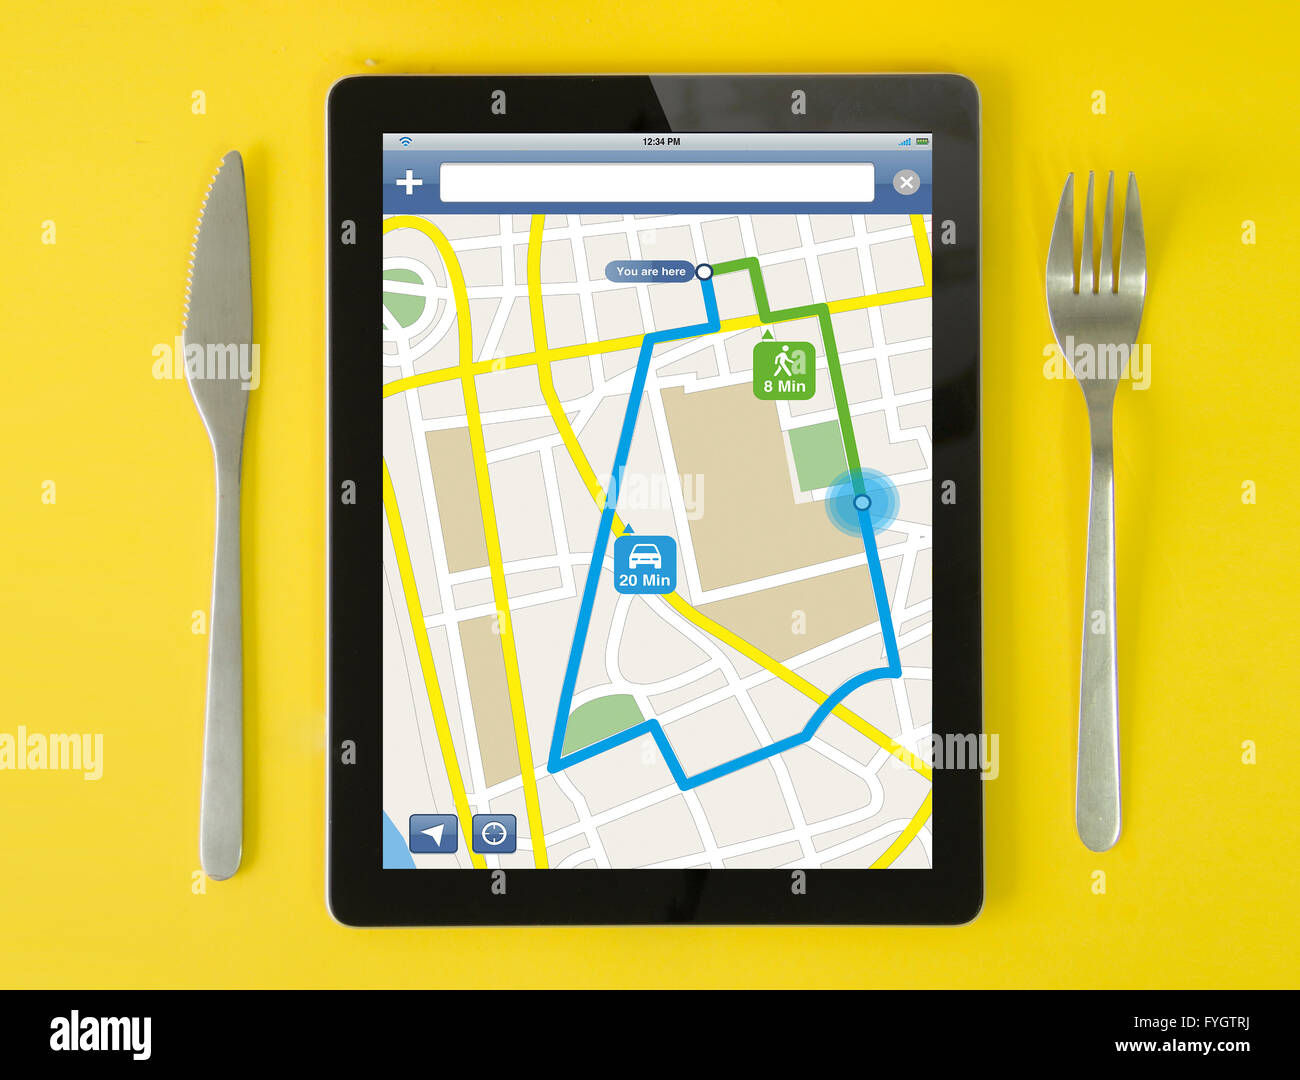 tablet gps concept: hipster breakfast with route planner app on a tablet screen. screen graphics are made up. Stock Photo